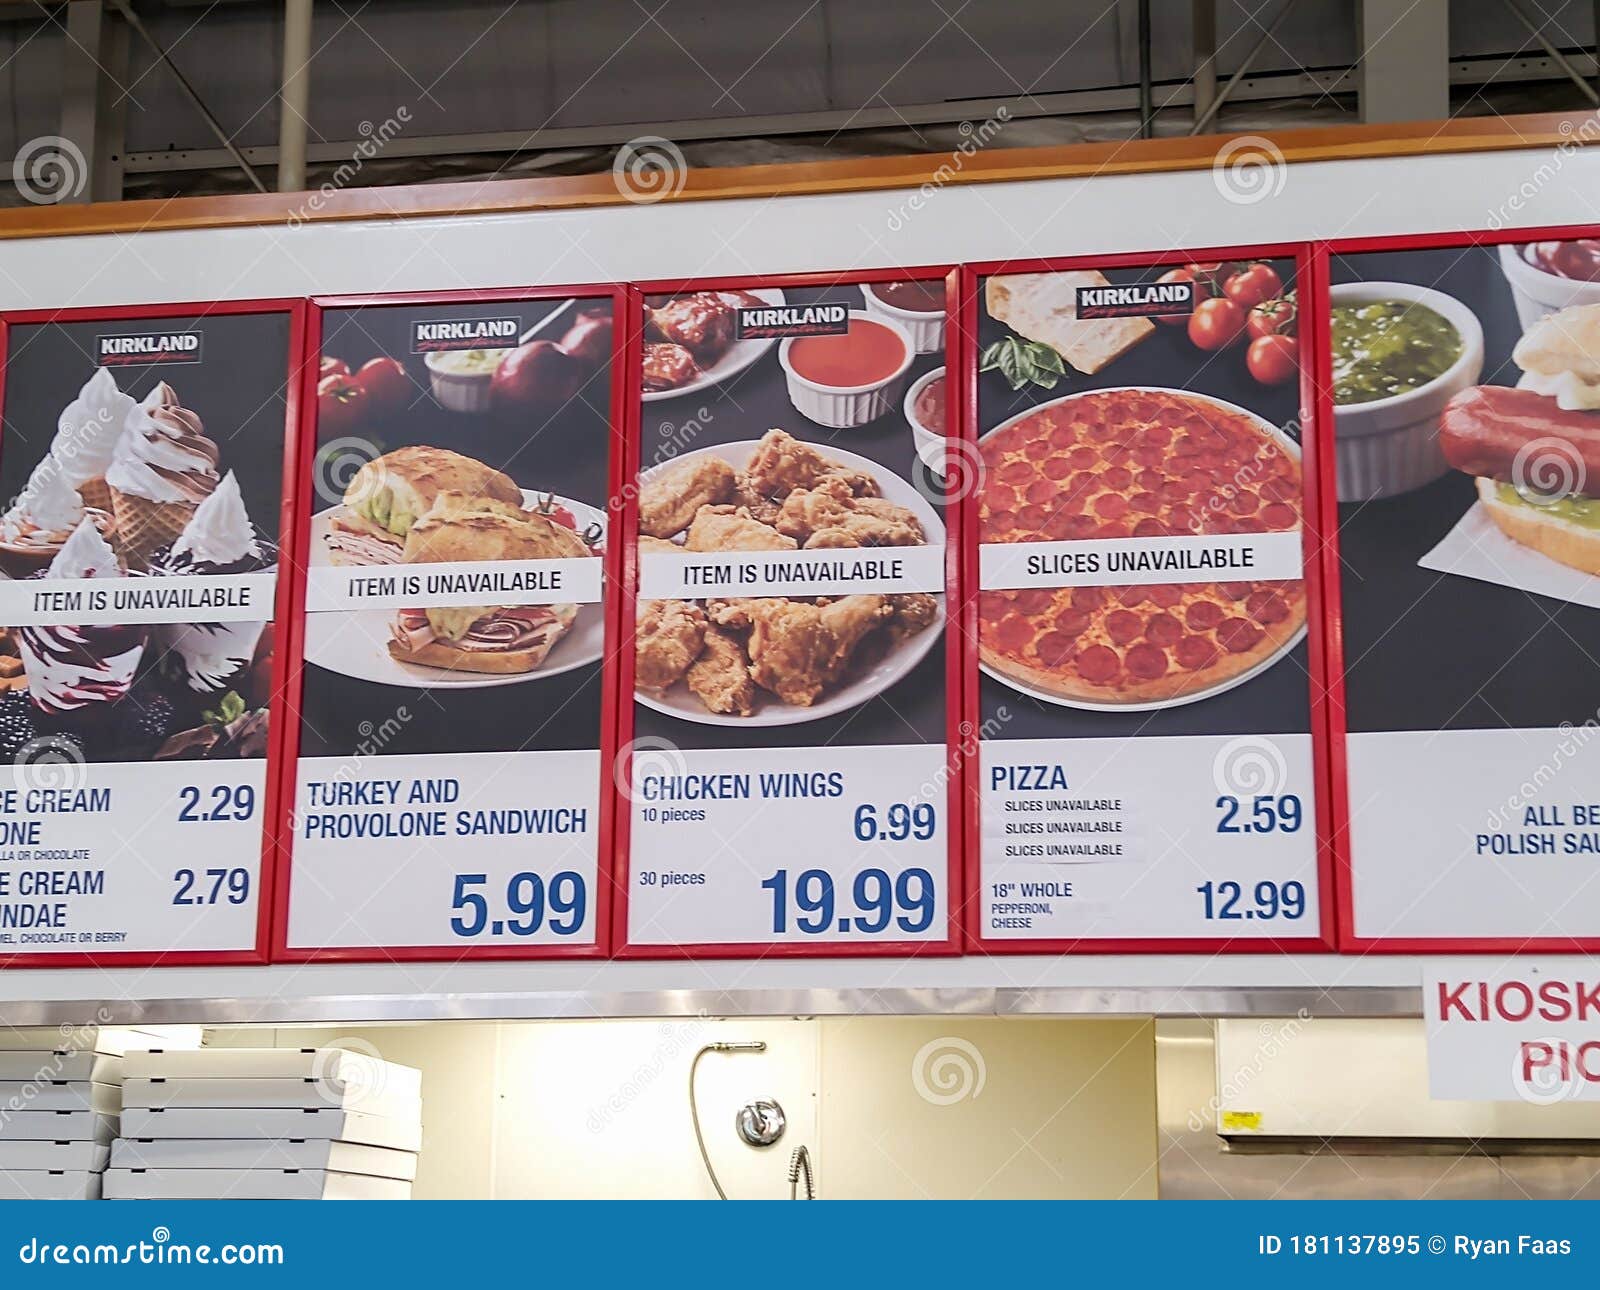 Costco Food Court Unavailable Editorial Image Image Of Closed Lunch